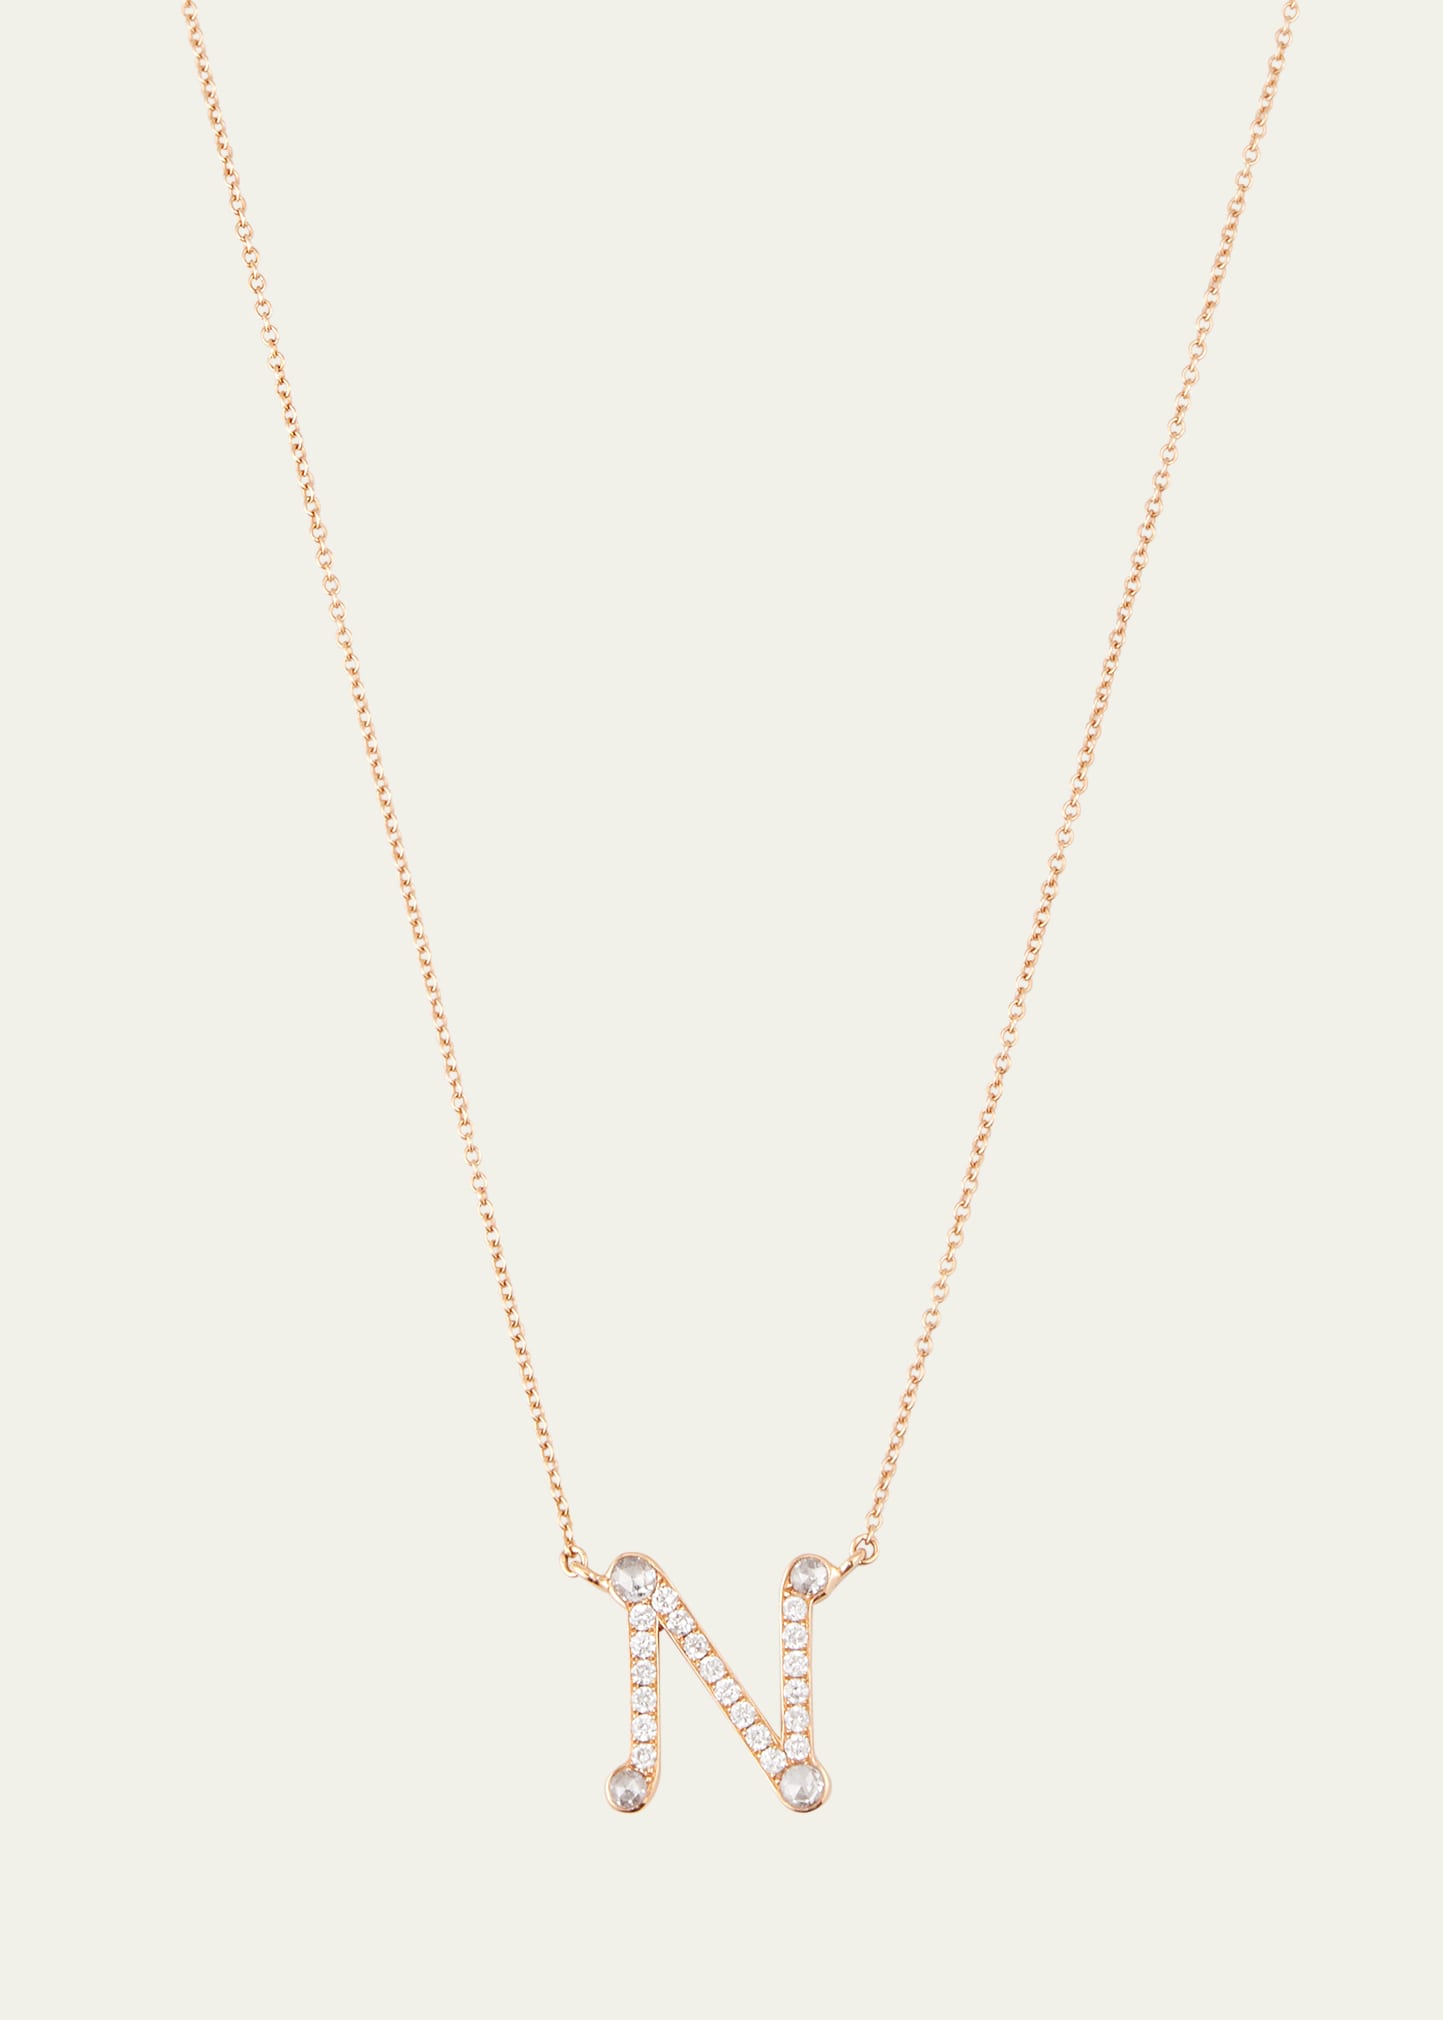 18K Rose Gold Alphabet N Charm Necklace with Diamonds